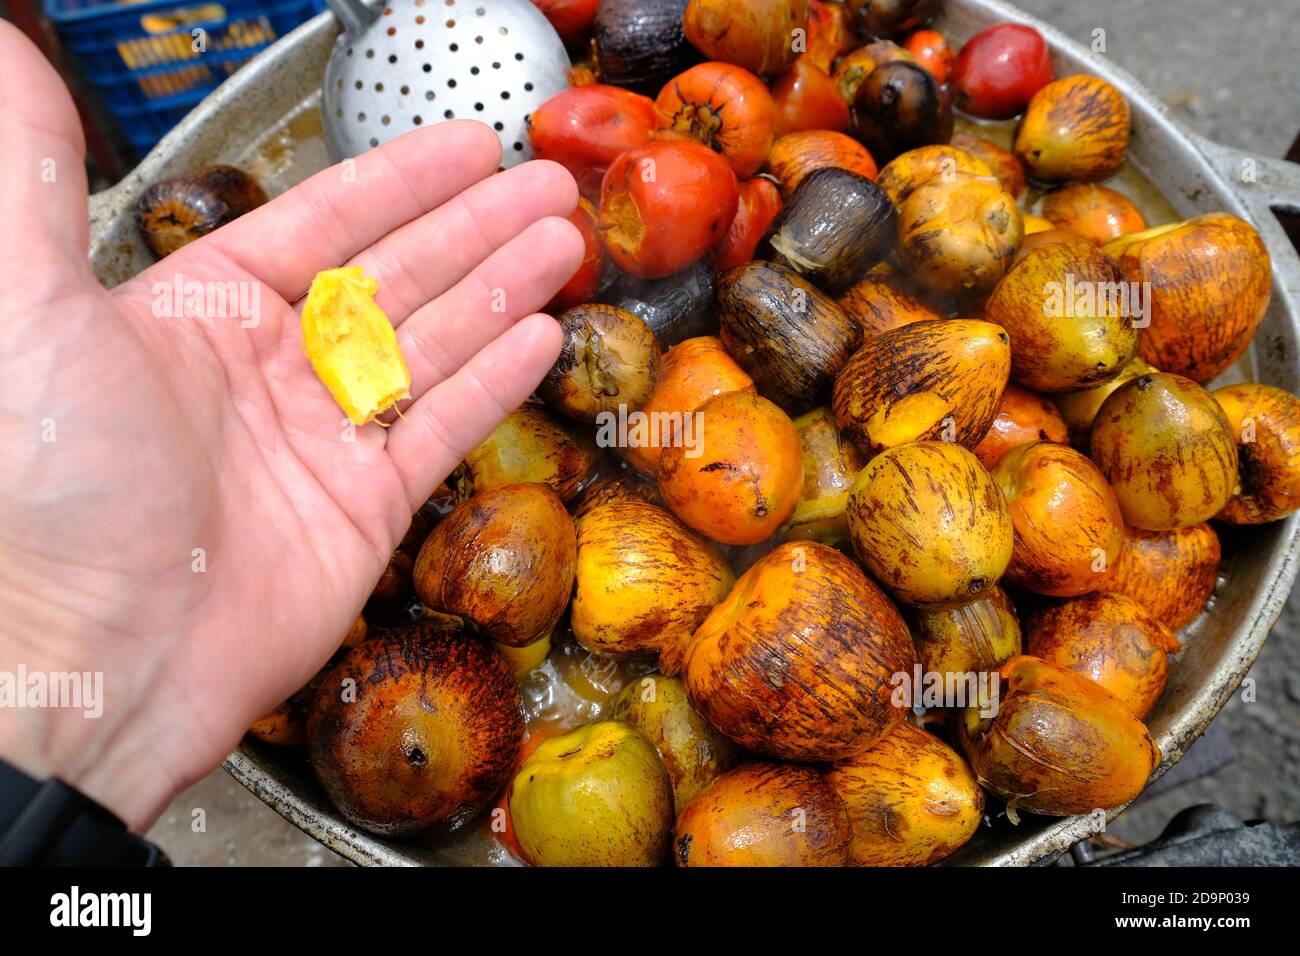 Costa Rica Arenal Volcano and La Fortunaa - Cooked Peach palm fruit - Bactris gasipaes - Pejibaye Stock Photo